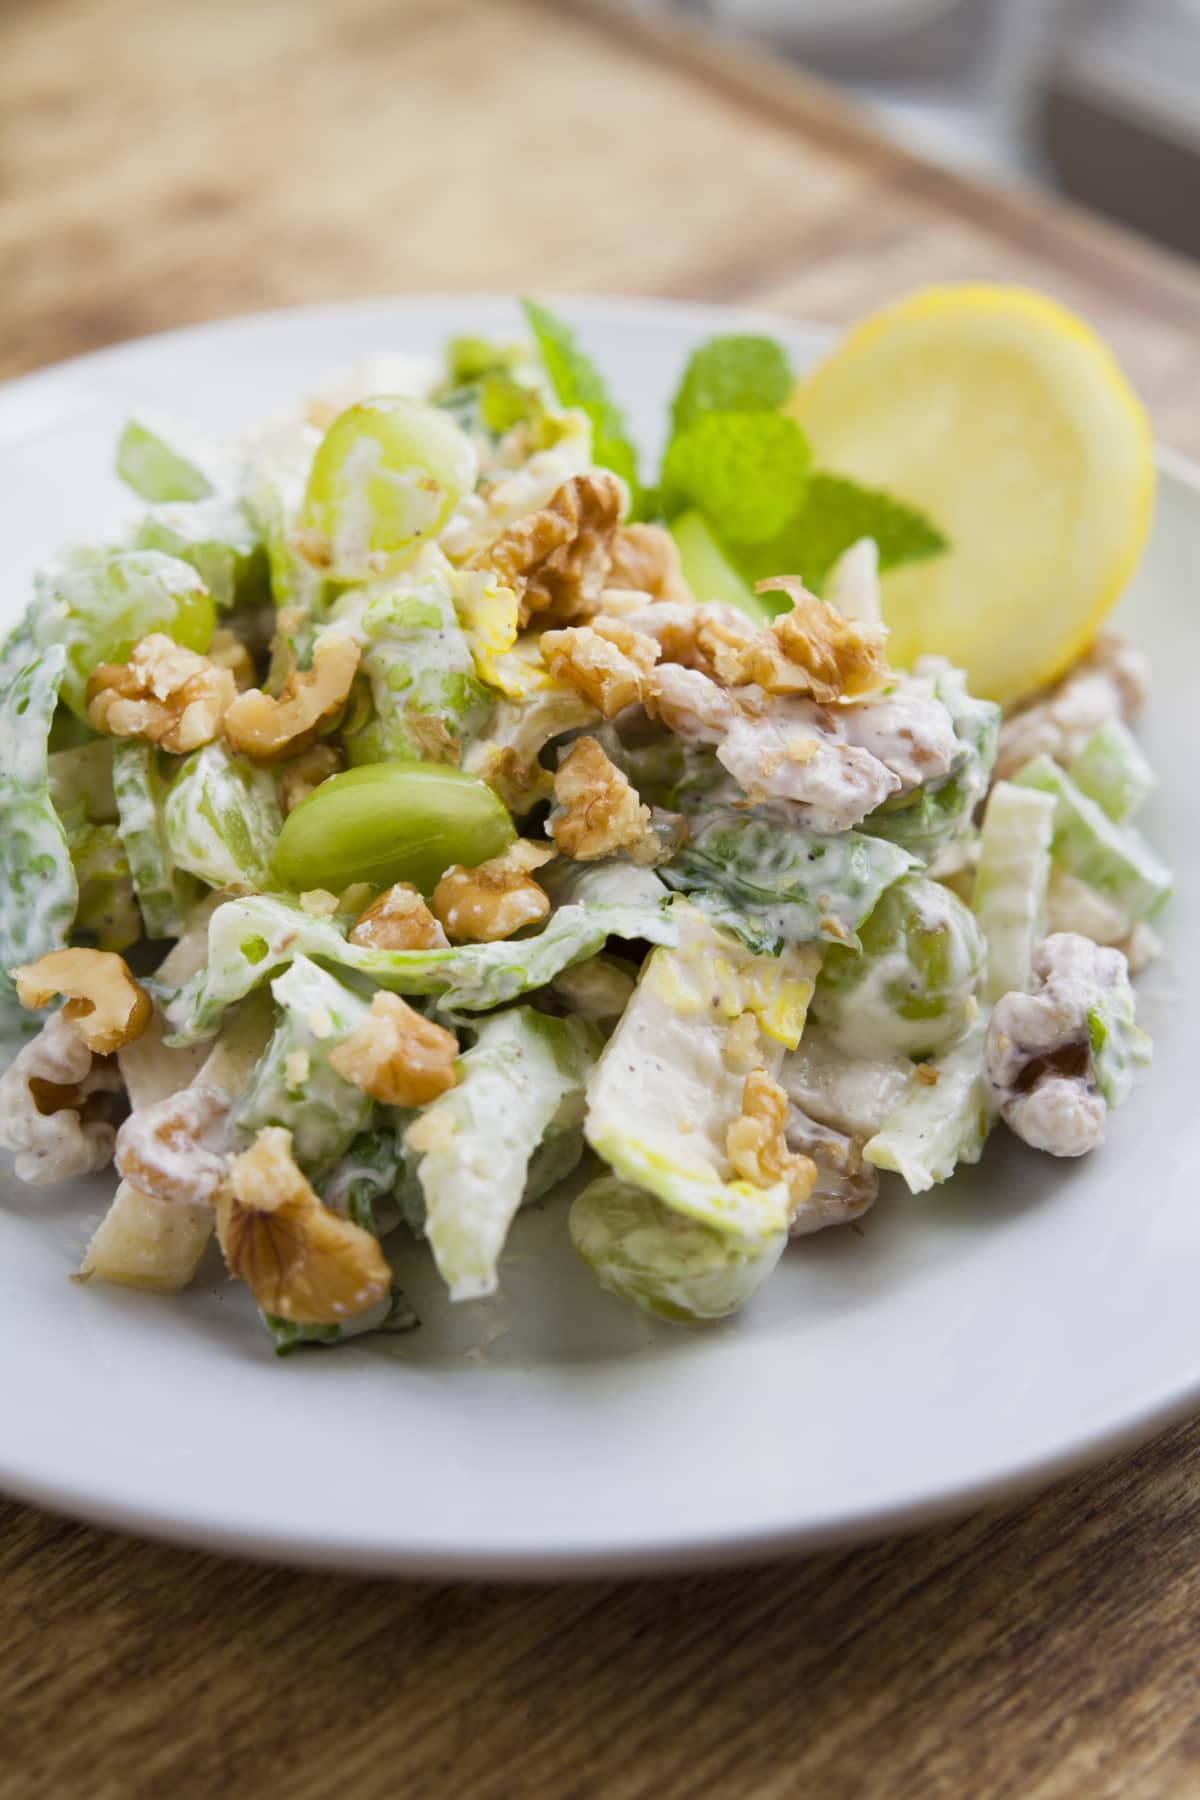 A Waldorf salad is a fruit and nut salad generally made of fresh apples, celery, grapes and walnuts, dressed in mayonnaise or yoghurt sauce.